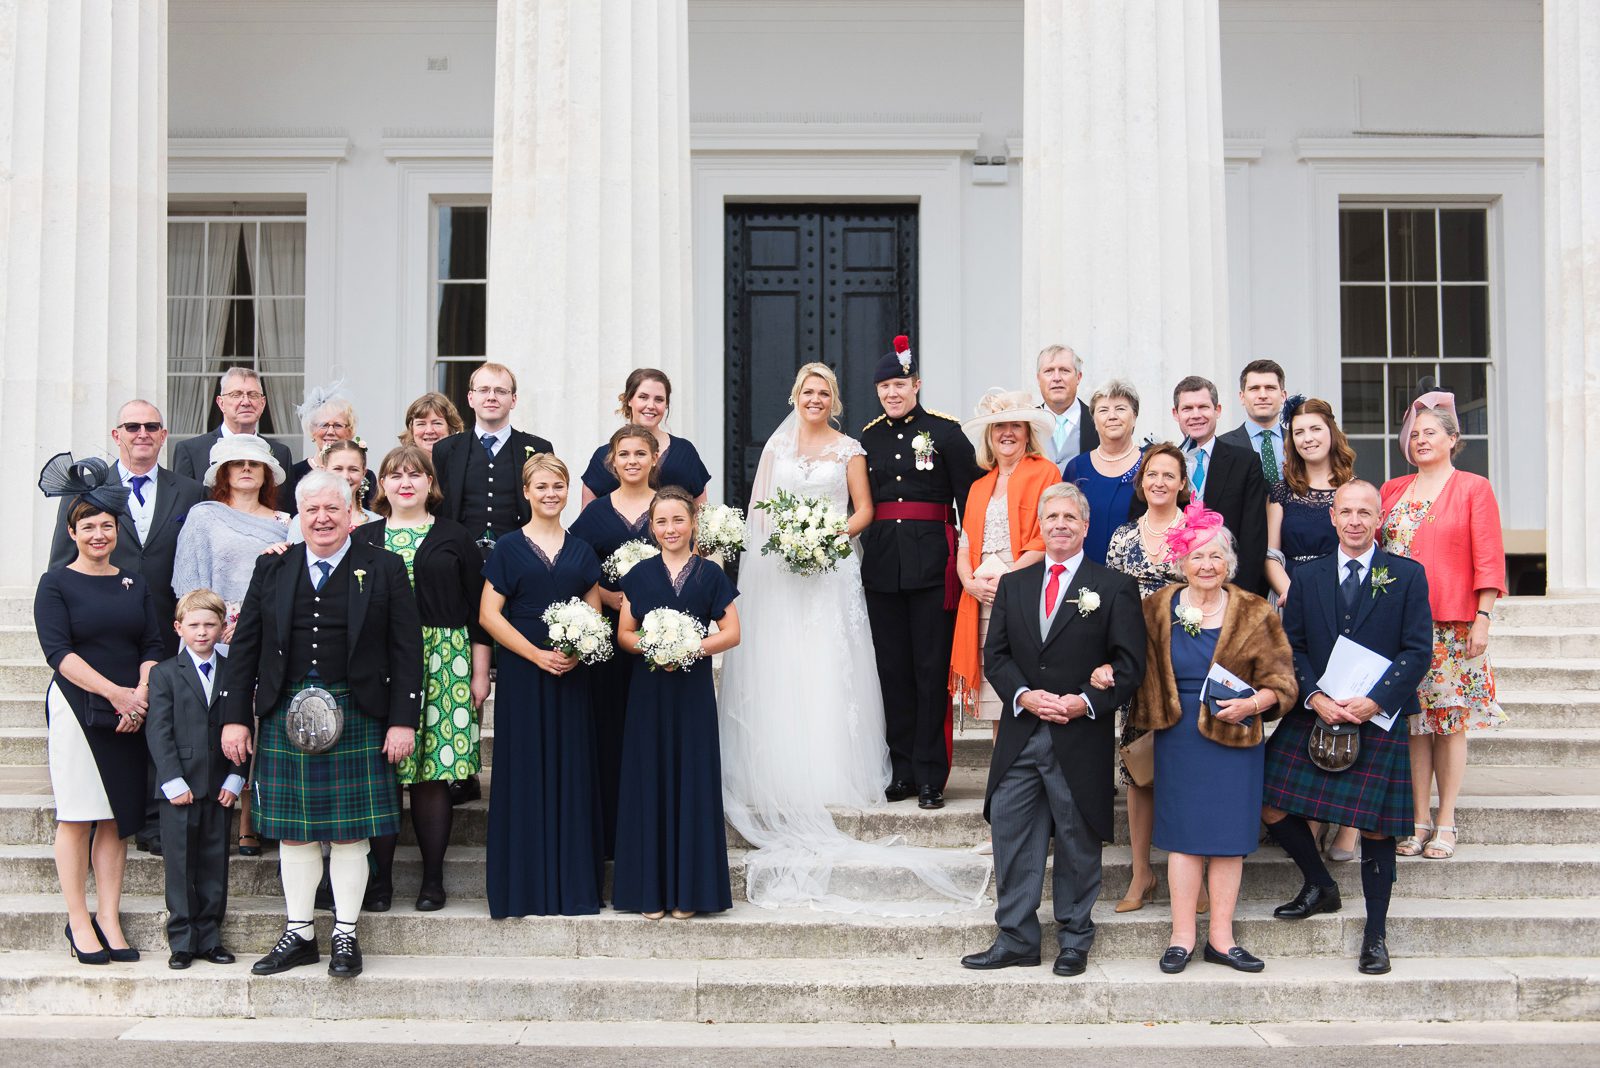 A group photograph of wedding guests on the steps of the staff college at the RMAS.